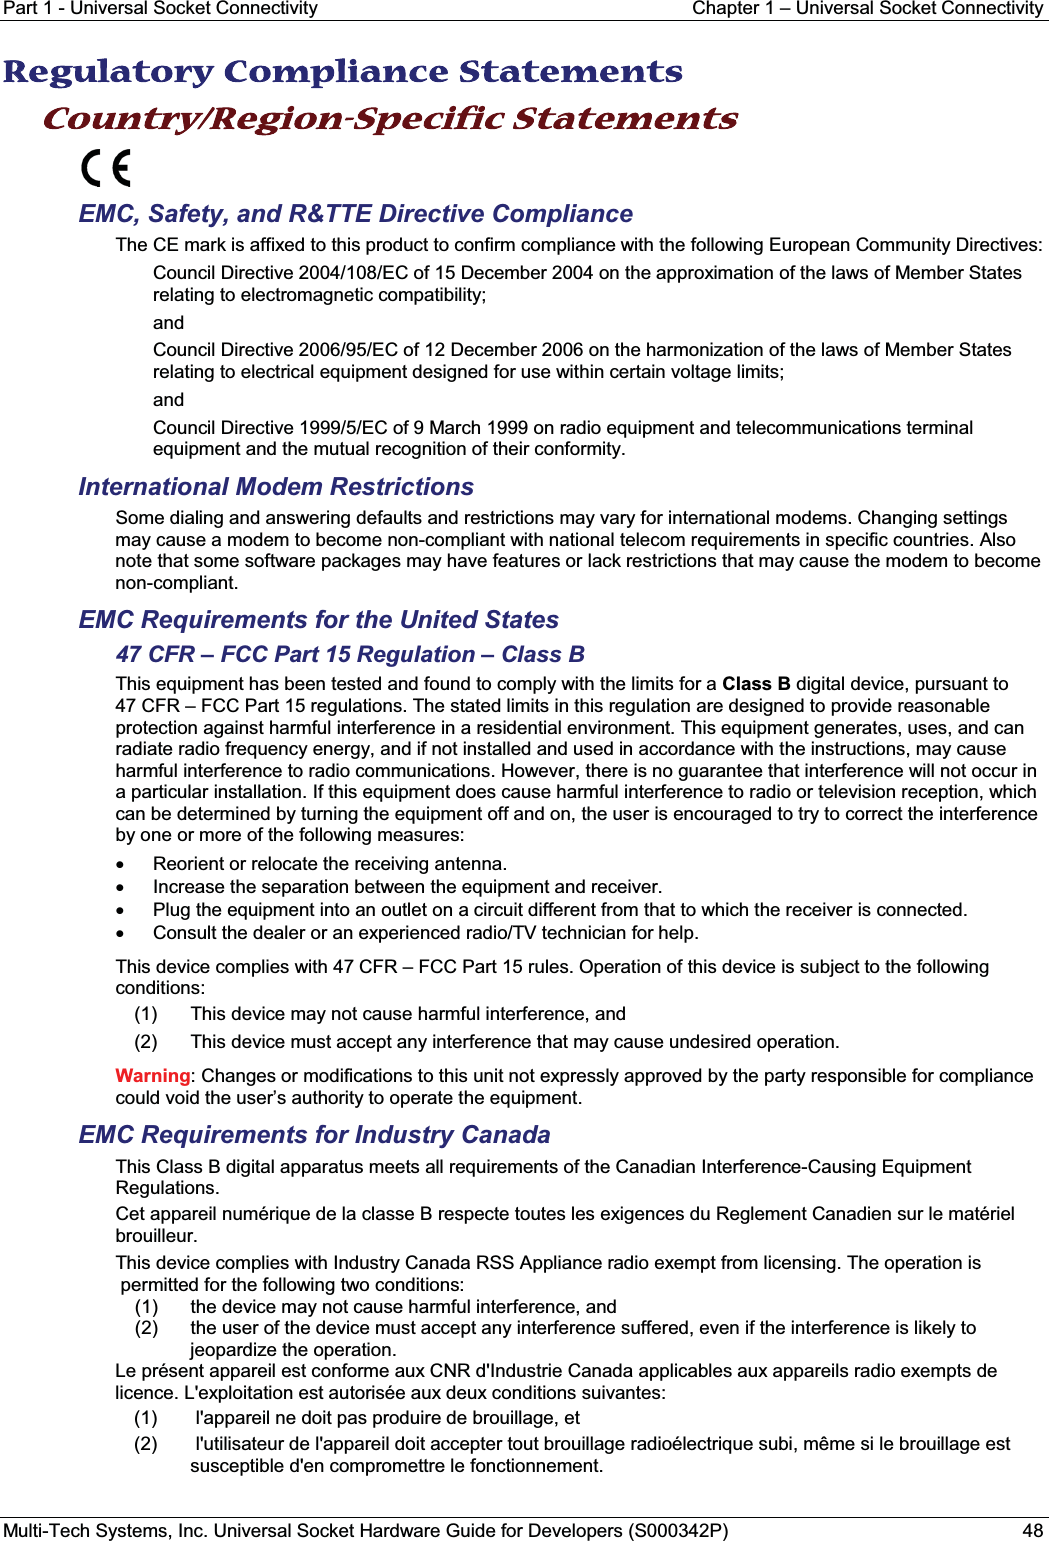 Part 1 - Universal Socket Connectivity Chapter 1 – Universal Socket ConnectivityMulti-Tech Systems, Inc. Universal Socket Hardware Guide for Developers (S000342P) 48RRegulatory Compliance Statements Country/Region-Specific Statements EMC, Safety, and R&amp;TTE Directive ComplianceThe CE mark is affixed to this product to confirm compliance with the following European Community Directives:Council Directive 2004/108/EC of 15 December 2004 on the approximation of the laws of Member States relating to electromagnetic compatibility; andCouncil Directive 2006/95/EC of 12 December 2006 on the harmonization of the laws of Member States relating to electrical equipment designed for use within certain voltage limits;andCouncil Directive 1999/5/EC of 9 March 1999 on radio equipment and telecommunications terminal equipment and the mutual recognition of their conformity.International Modem RestrictionsSome dialing and answering defaults and restrictions may vary for international modems. Changing settings may cause a modem to become non-compliant with national telecom requirements in specific countries. Also note that some software packages may have features or lack restrictions that may cause the modem to become non-compliant.EMC Requirements for the United States47 CFR – FCC Part 15 Regulation – Class BThis equipment has been tested and found to comply with the limits for a Class B digital device, pursuant to 47 CFR – FCC Part 15 regulations. The stated limits in this regulation are designed to provide reasonable protection against harmful interference in a residential environment. This equipment generates, uses, and can radiate radio frequency energy, and if not installed and used in accordance with the instructions, may cause harmful interference to radio communications. However, there is no guarantee that interference will not occur in a particular installation. If this equipment does cause harmful interference to radio or television reception, which can be determined by turning the equipment off and on, the user is encouraged to try to correct the interference by one or more of the following measures:xReorient or relocate the receiving antenna.xIncrease the separation between the equipment and receiver.xPlug the equipment into an outlet on a circuit different from that to which the receiver is connected.xConsult the dealer or an experienced radio/TV technician for help.This device complies with 47 CFR – FCC Part 15 rules. Operation of this device is subject to the following conditions: (1) This device may not cause harmful interference, and (2) This device must accept any interference that may cause undesired operation.Warning: Changes or modifications to this unit not expressly approved by the party responsible for compliance could void the user’s authority to operate the equipment.EMC Requirements for Industry CanadaThis Class B digital apparatus meets all requirements of the Canadian Interference-Causing Equipment Regulations.Cet appareil numérique de la classe B respecte toutes les exigences du Reglement Canadien sur le matériel brouilleur.This device complies with Industry Canada RSS Appliance radio exempt from licensing. The operation ispermitted for the following two conditions:(1)  the device may not cause harmful interference, and(2) the user of the device must accept any interference suffered, even if the interference is likely tojeopardize the operation.Le présent appareil est conforme aux CNR d&apos;Industrie Canada applicables aux appareils radio exempts de licence. L&apos;exploitation est autorisée aux deux conditions suivantes:(1) l&apos;appareil ne doit pas produire de brouillage, et (2) l&apos;utilisateur de l&apos;appareil doit accepter tout brouillage radioélectrique subi, même si le brouillage est susceptible d&apos;en compromettre le fonctionnement.